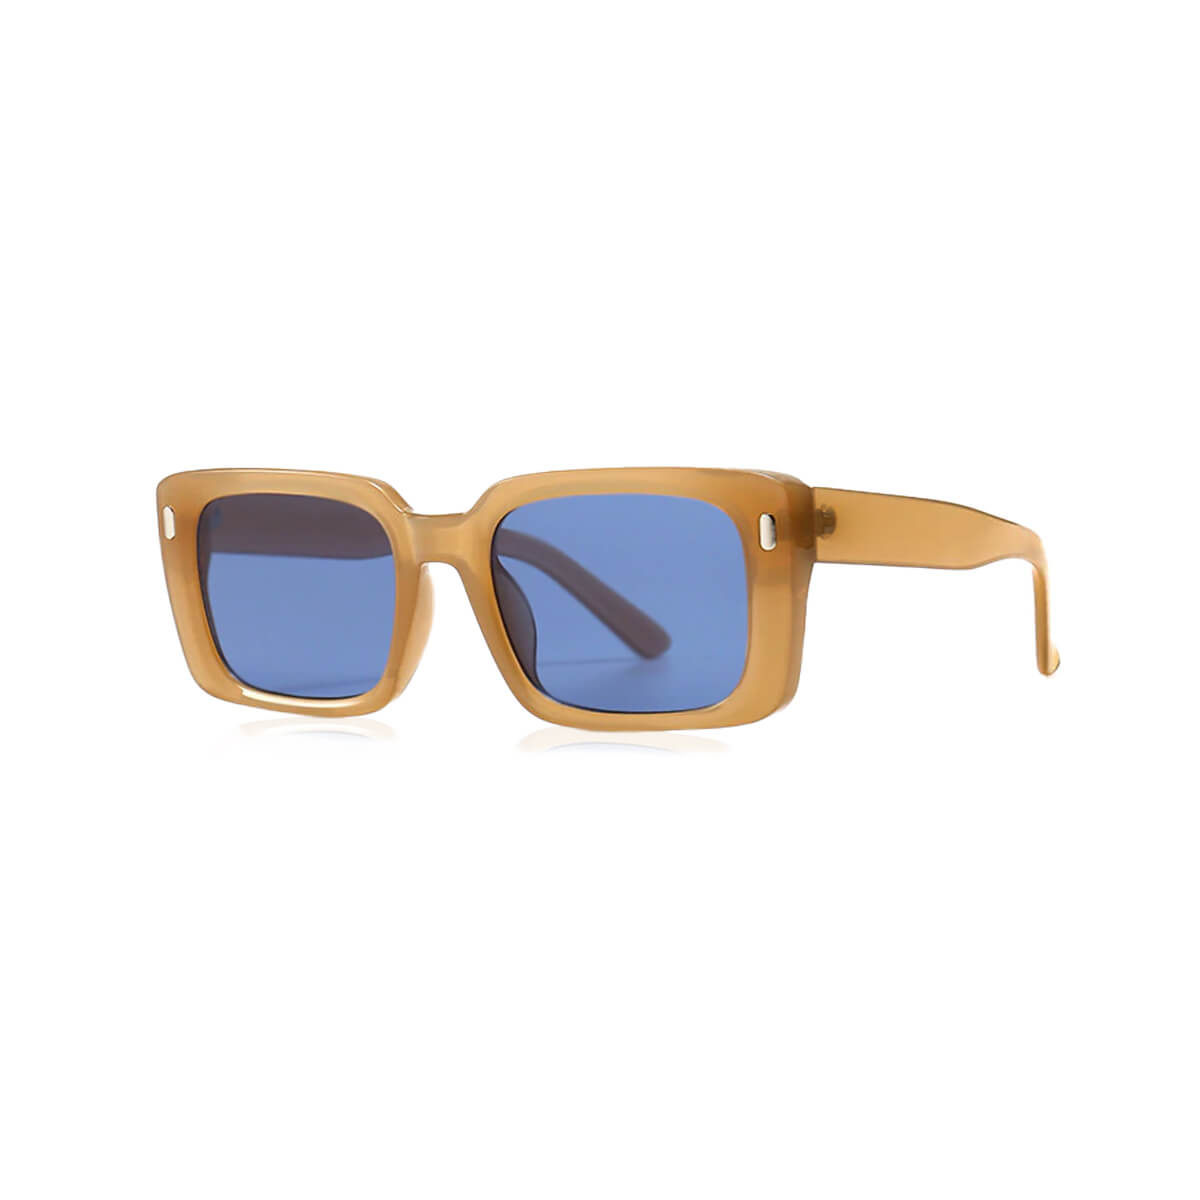 Biscuit Frame Sunglasses With Blue Lens Front